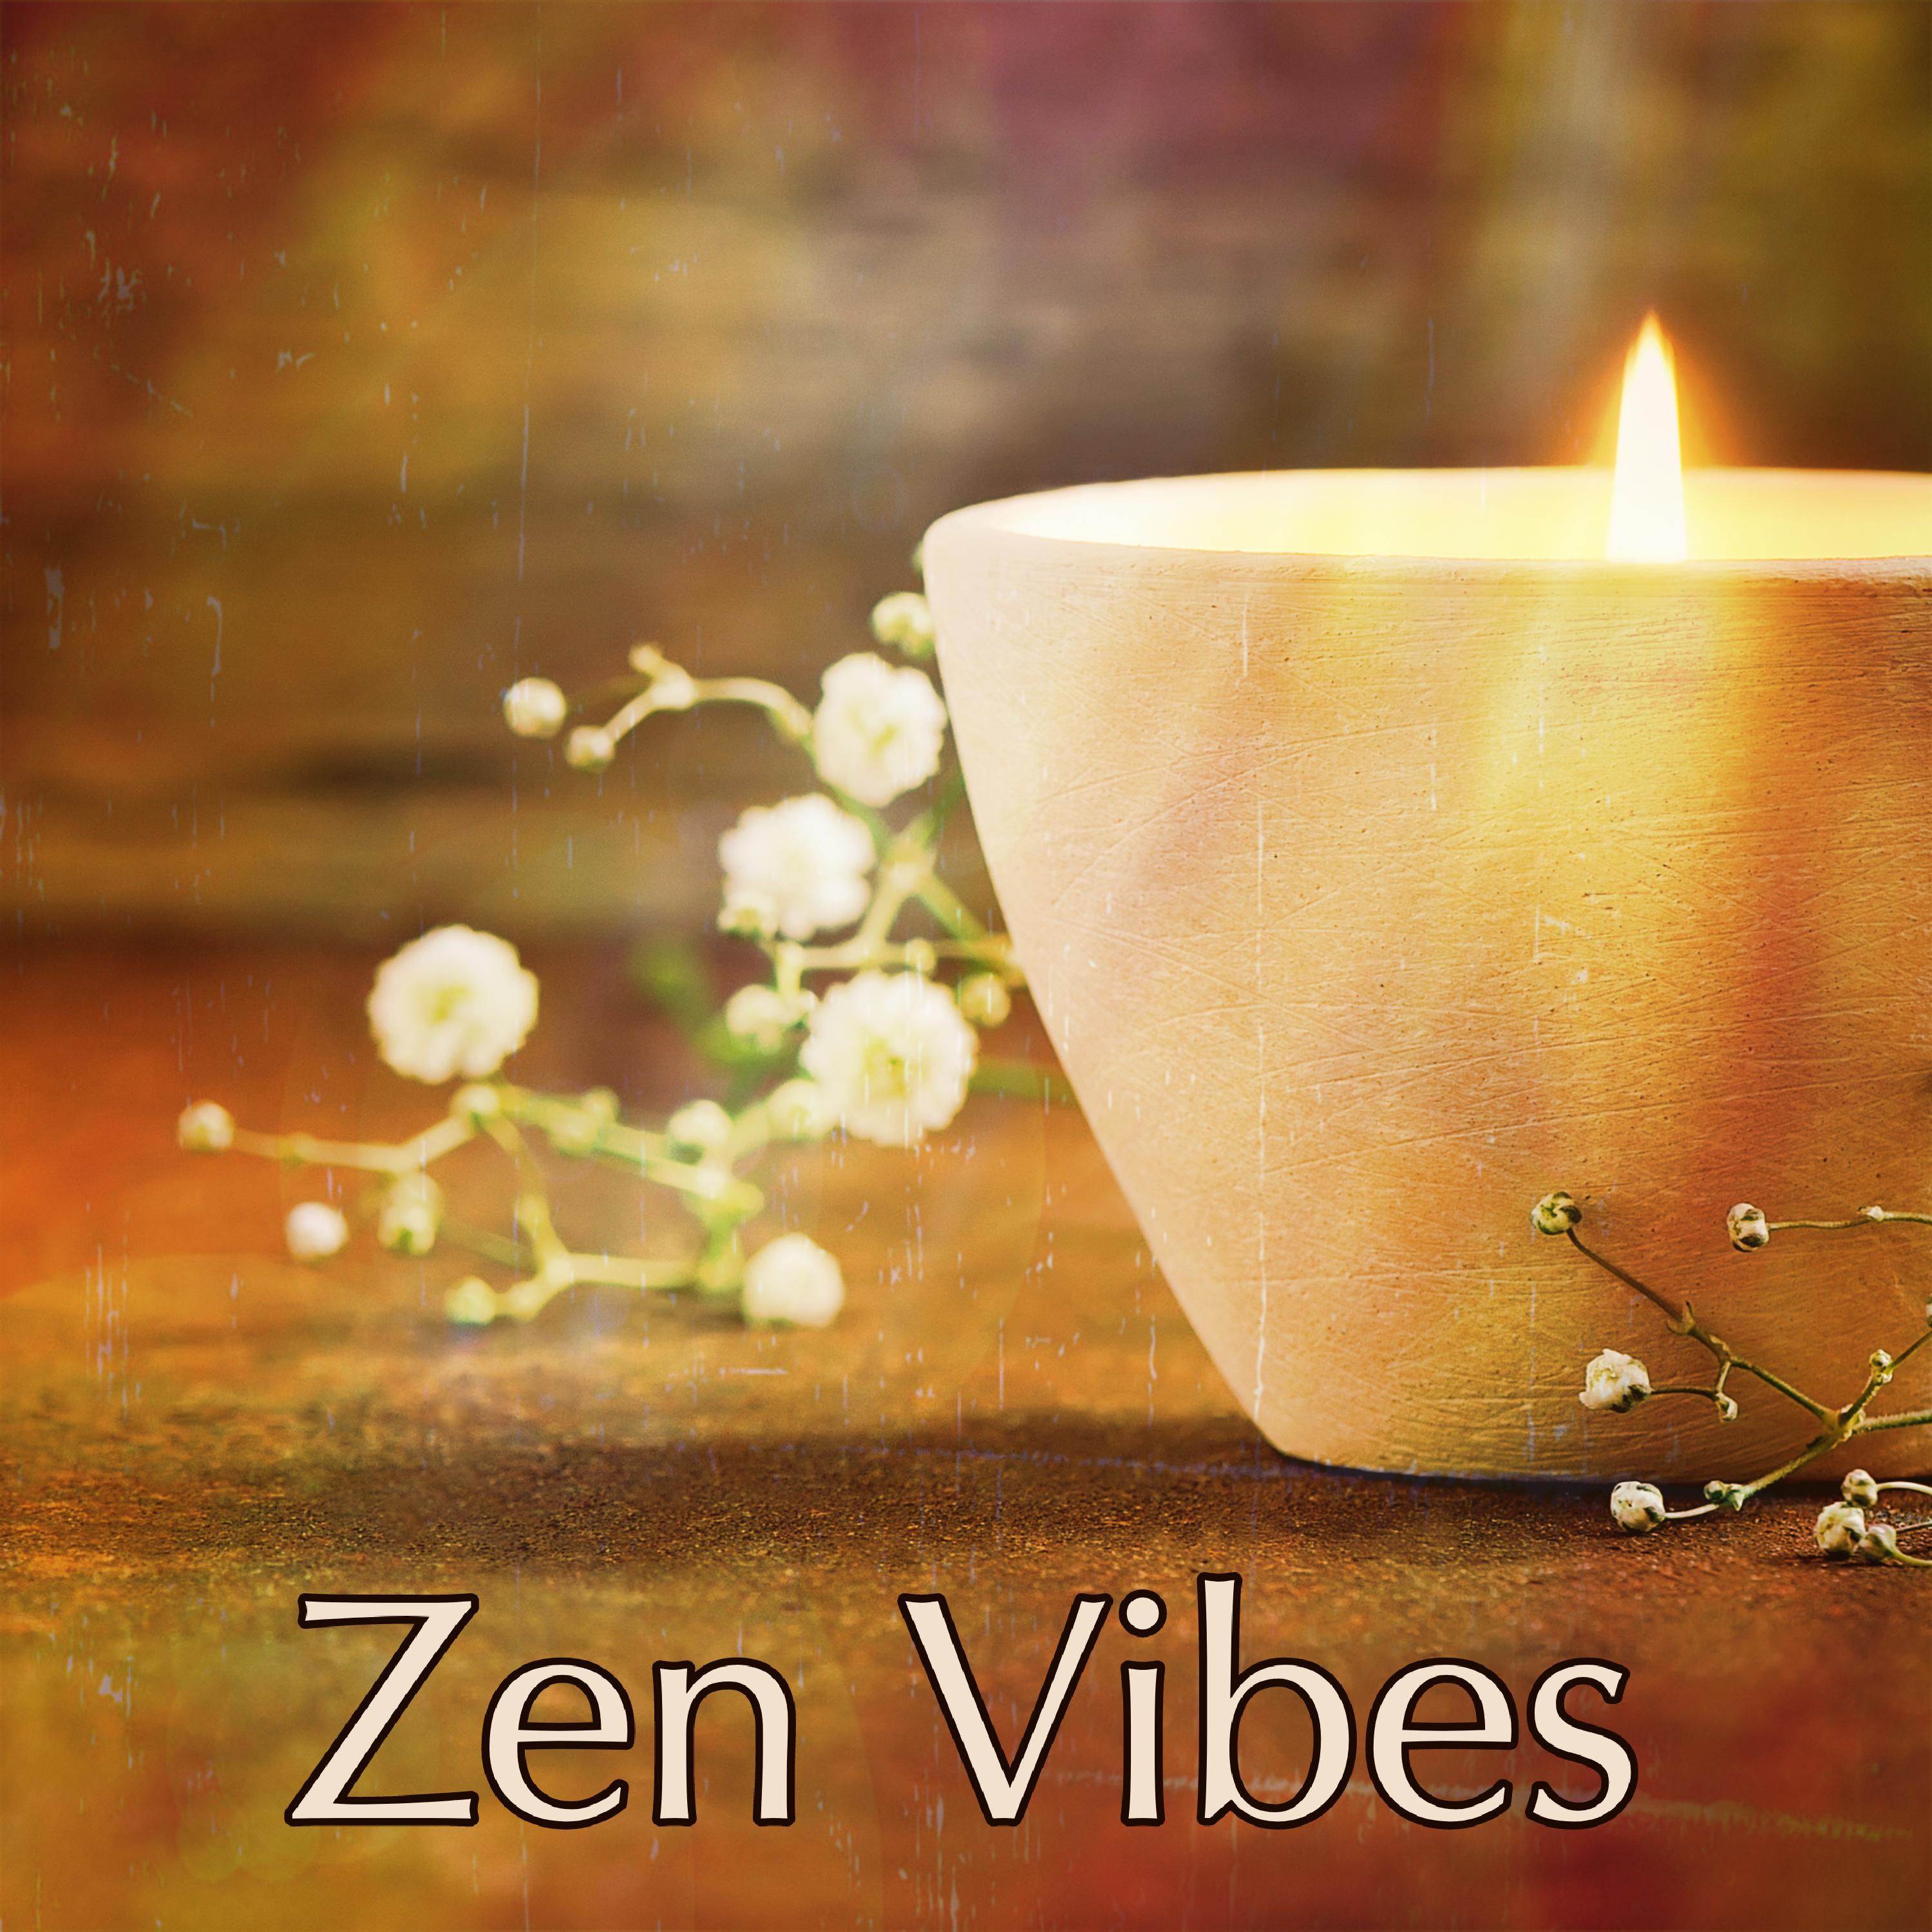 Zen Vibes  Easy Listening Music to Calm Down, Find Your Center, Here and Now